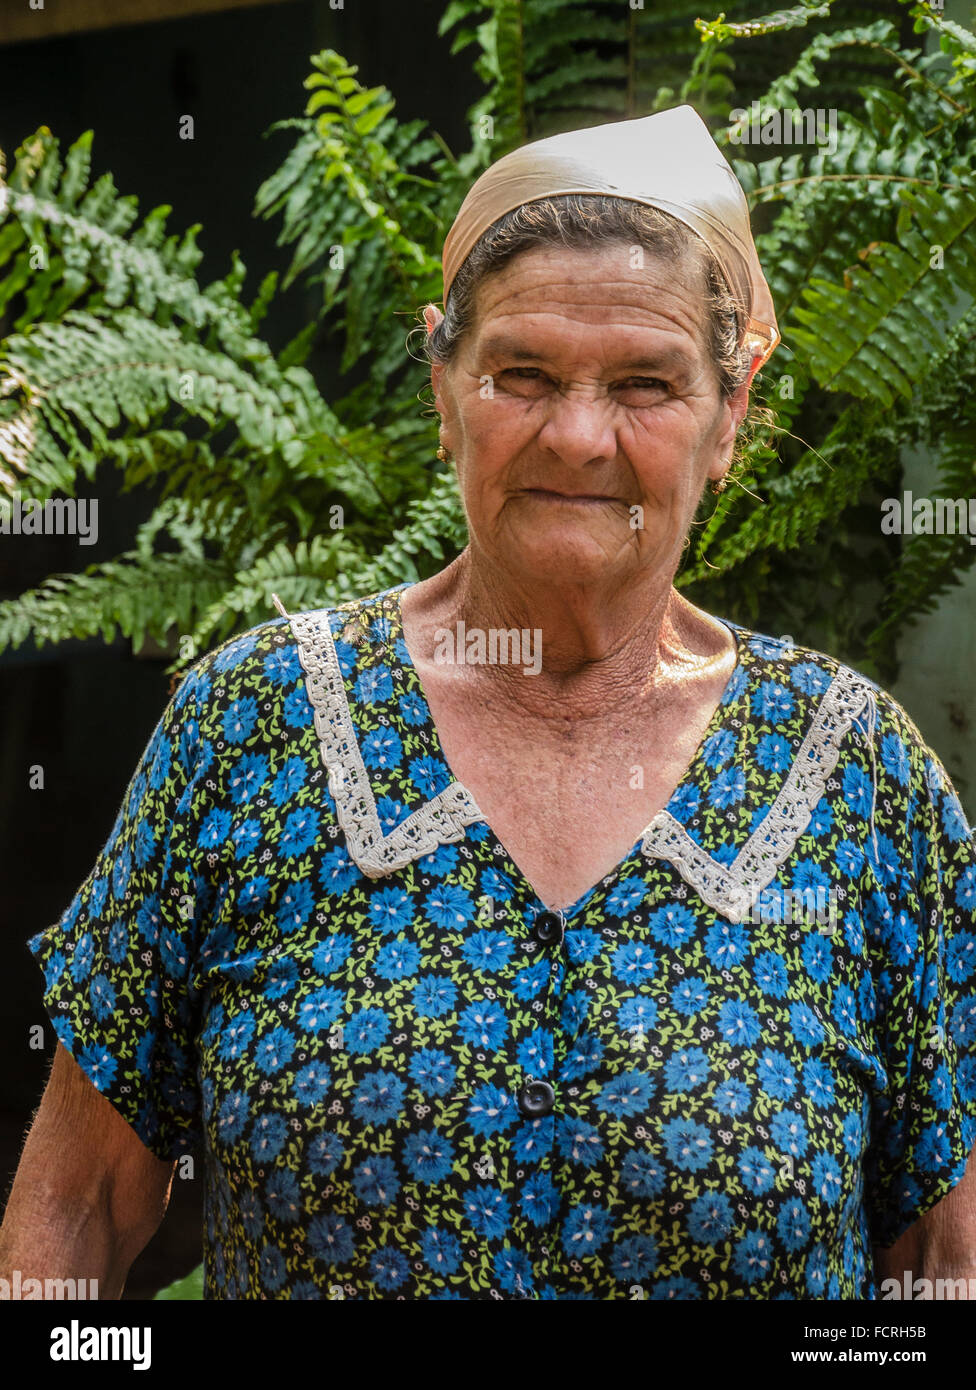 A senior citizen female farmer in Paraguay who produces mosto helado, a local beverage made from sugar cane juice. Stock Photo